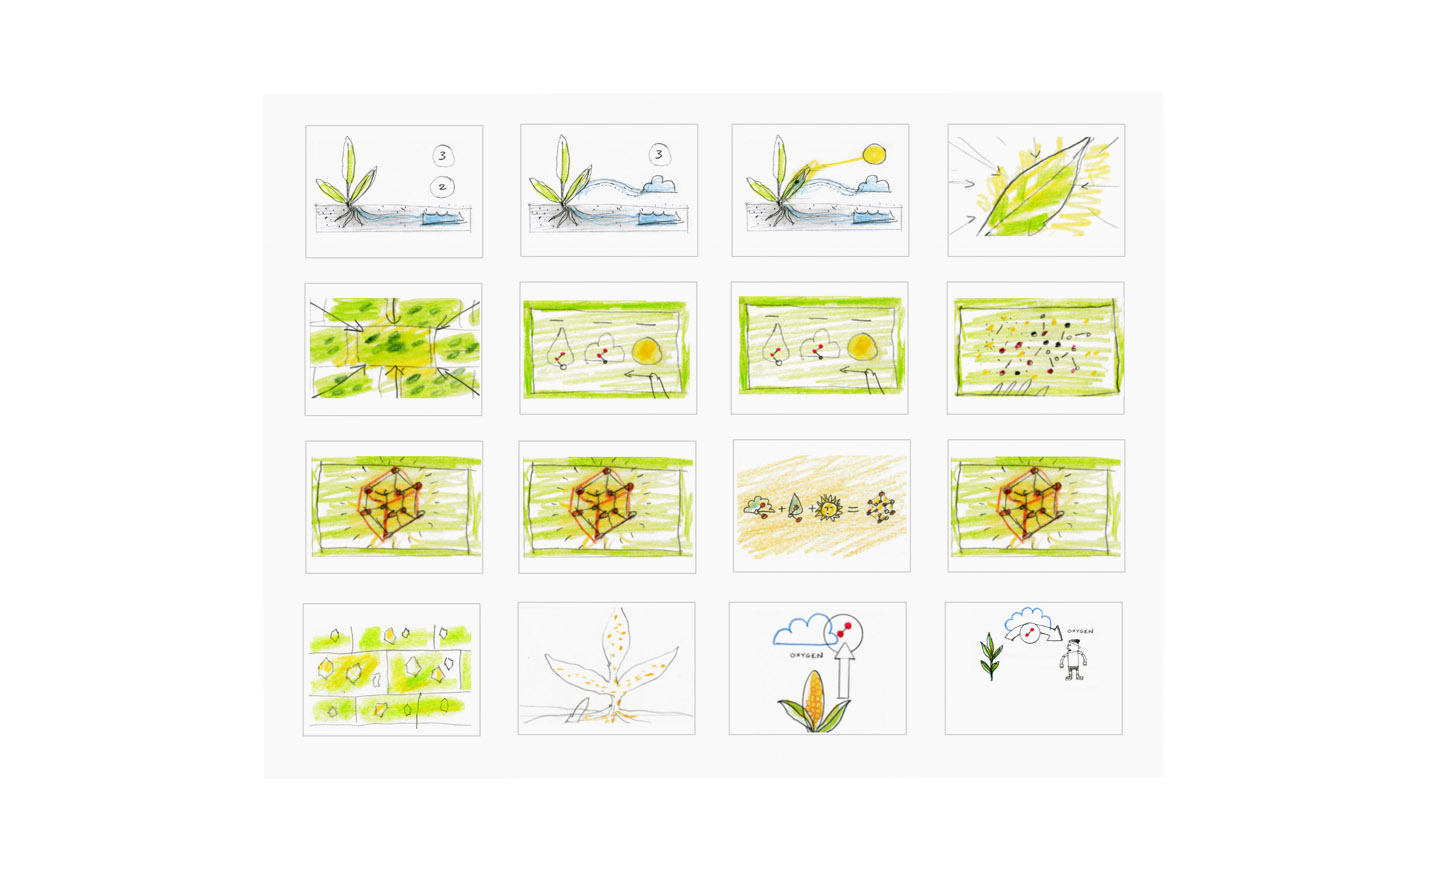 photosynthesis_sketches2.jpg